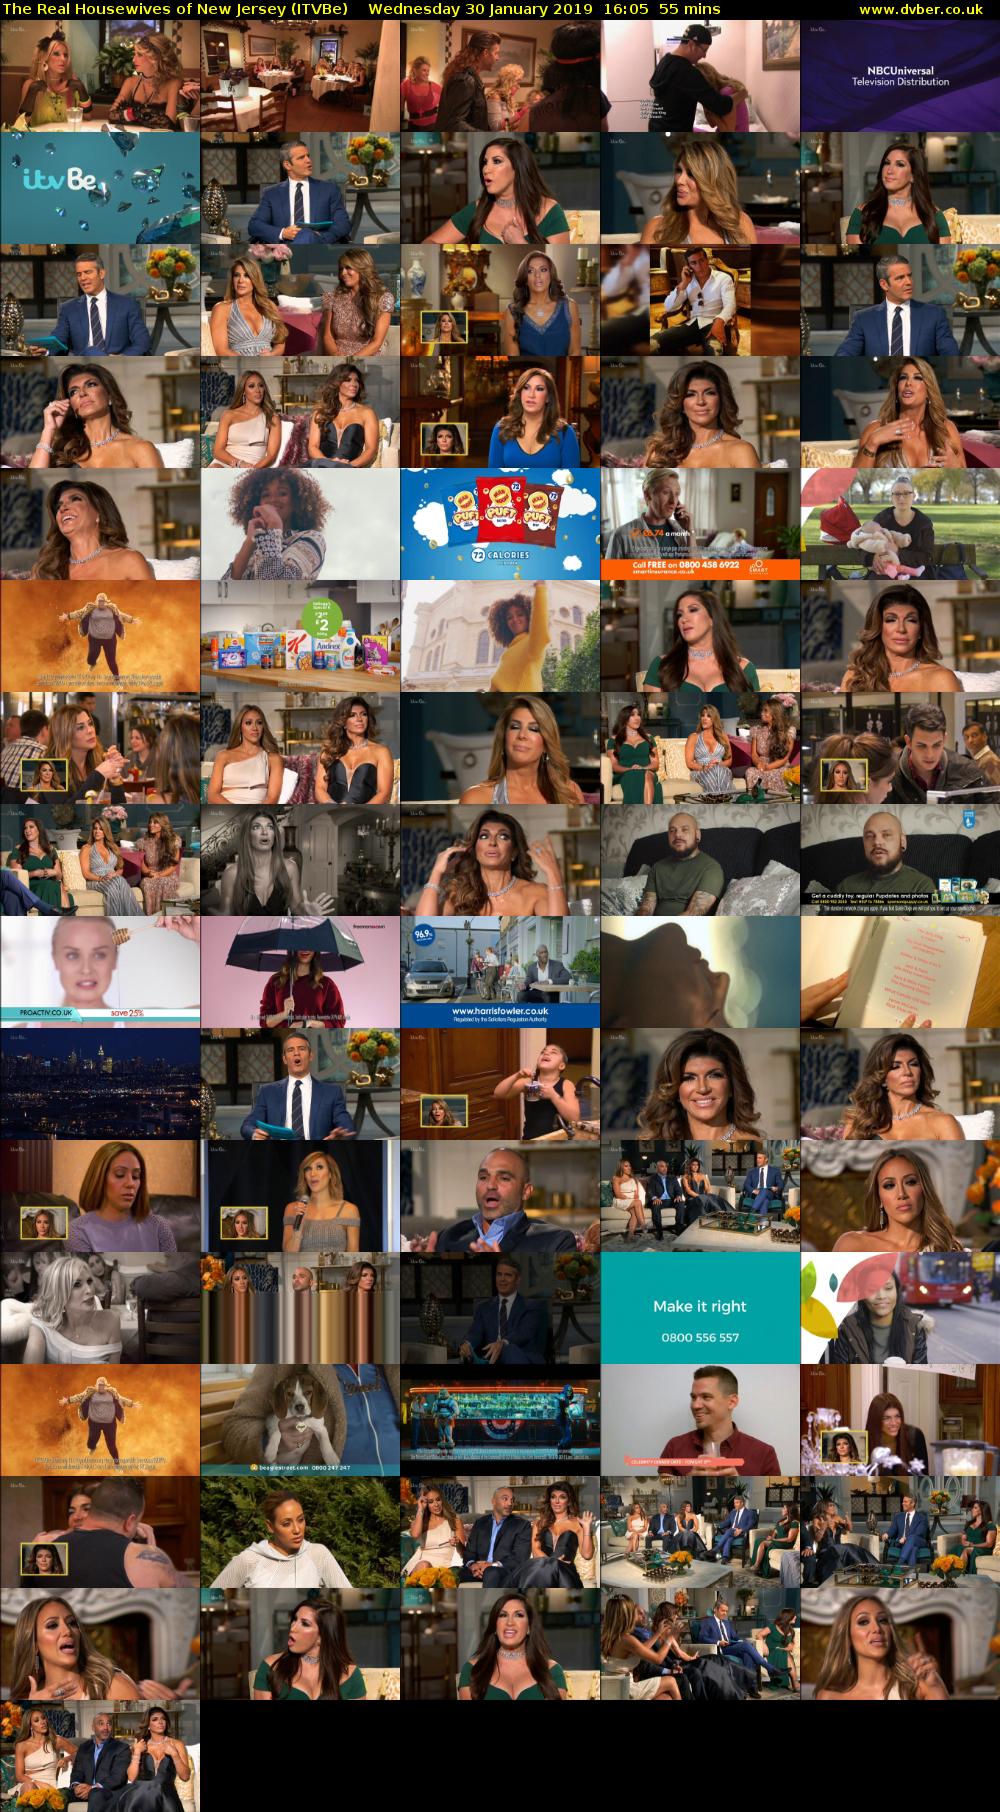 The Real Housewives of New Jersey (ITVBe) Wednesday 30 January 2019 16:05 - 17:00